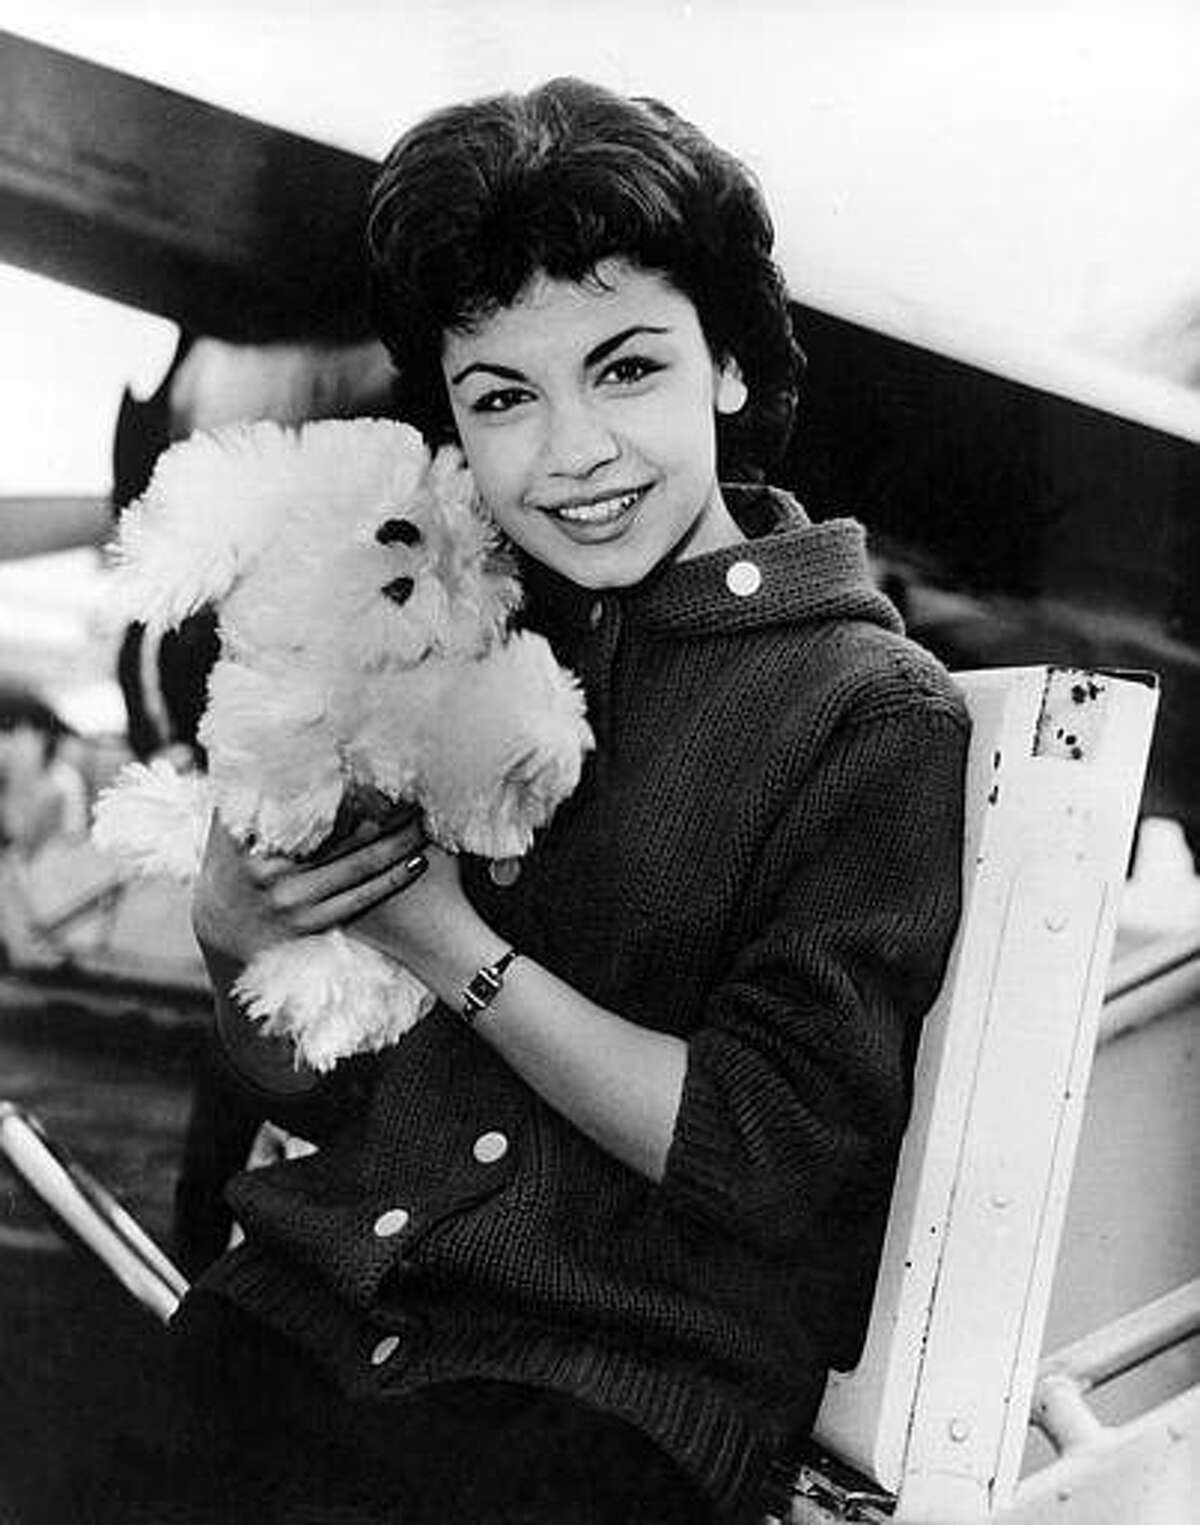 Walt Disney studio’s new star, 16-year-old Annette Funicello, poses with her Shaggy Dog doll, at Idlewild Airport in New York, on March 24, 1959. (AP Photo)